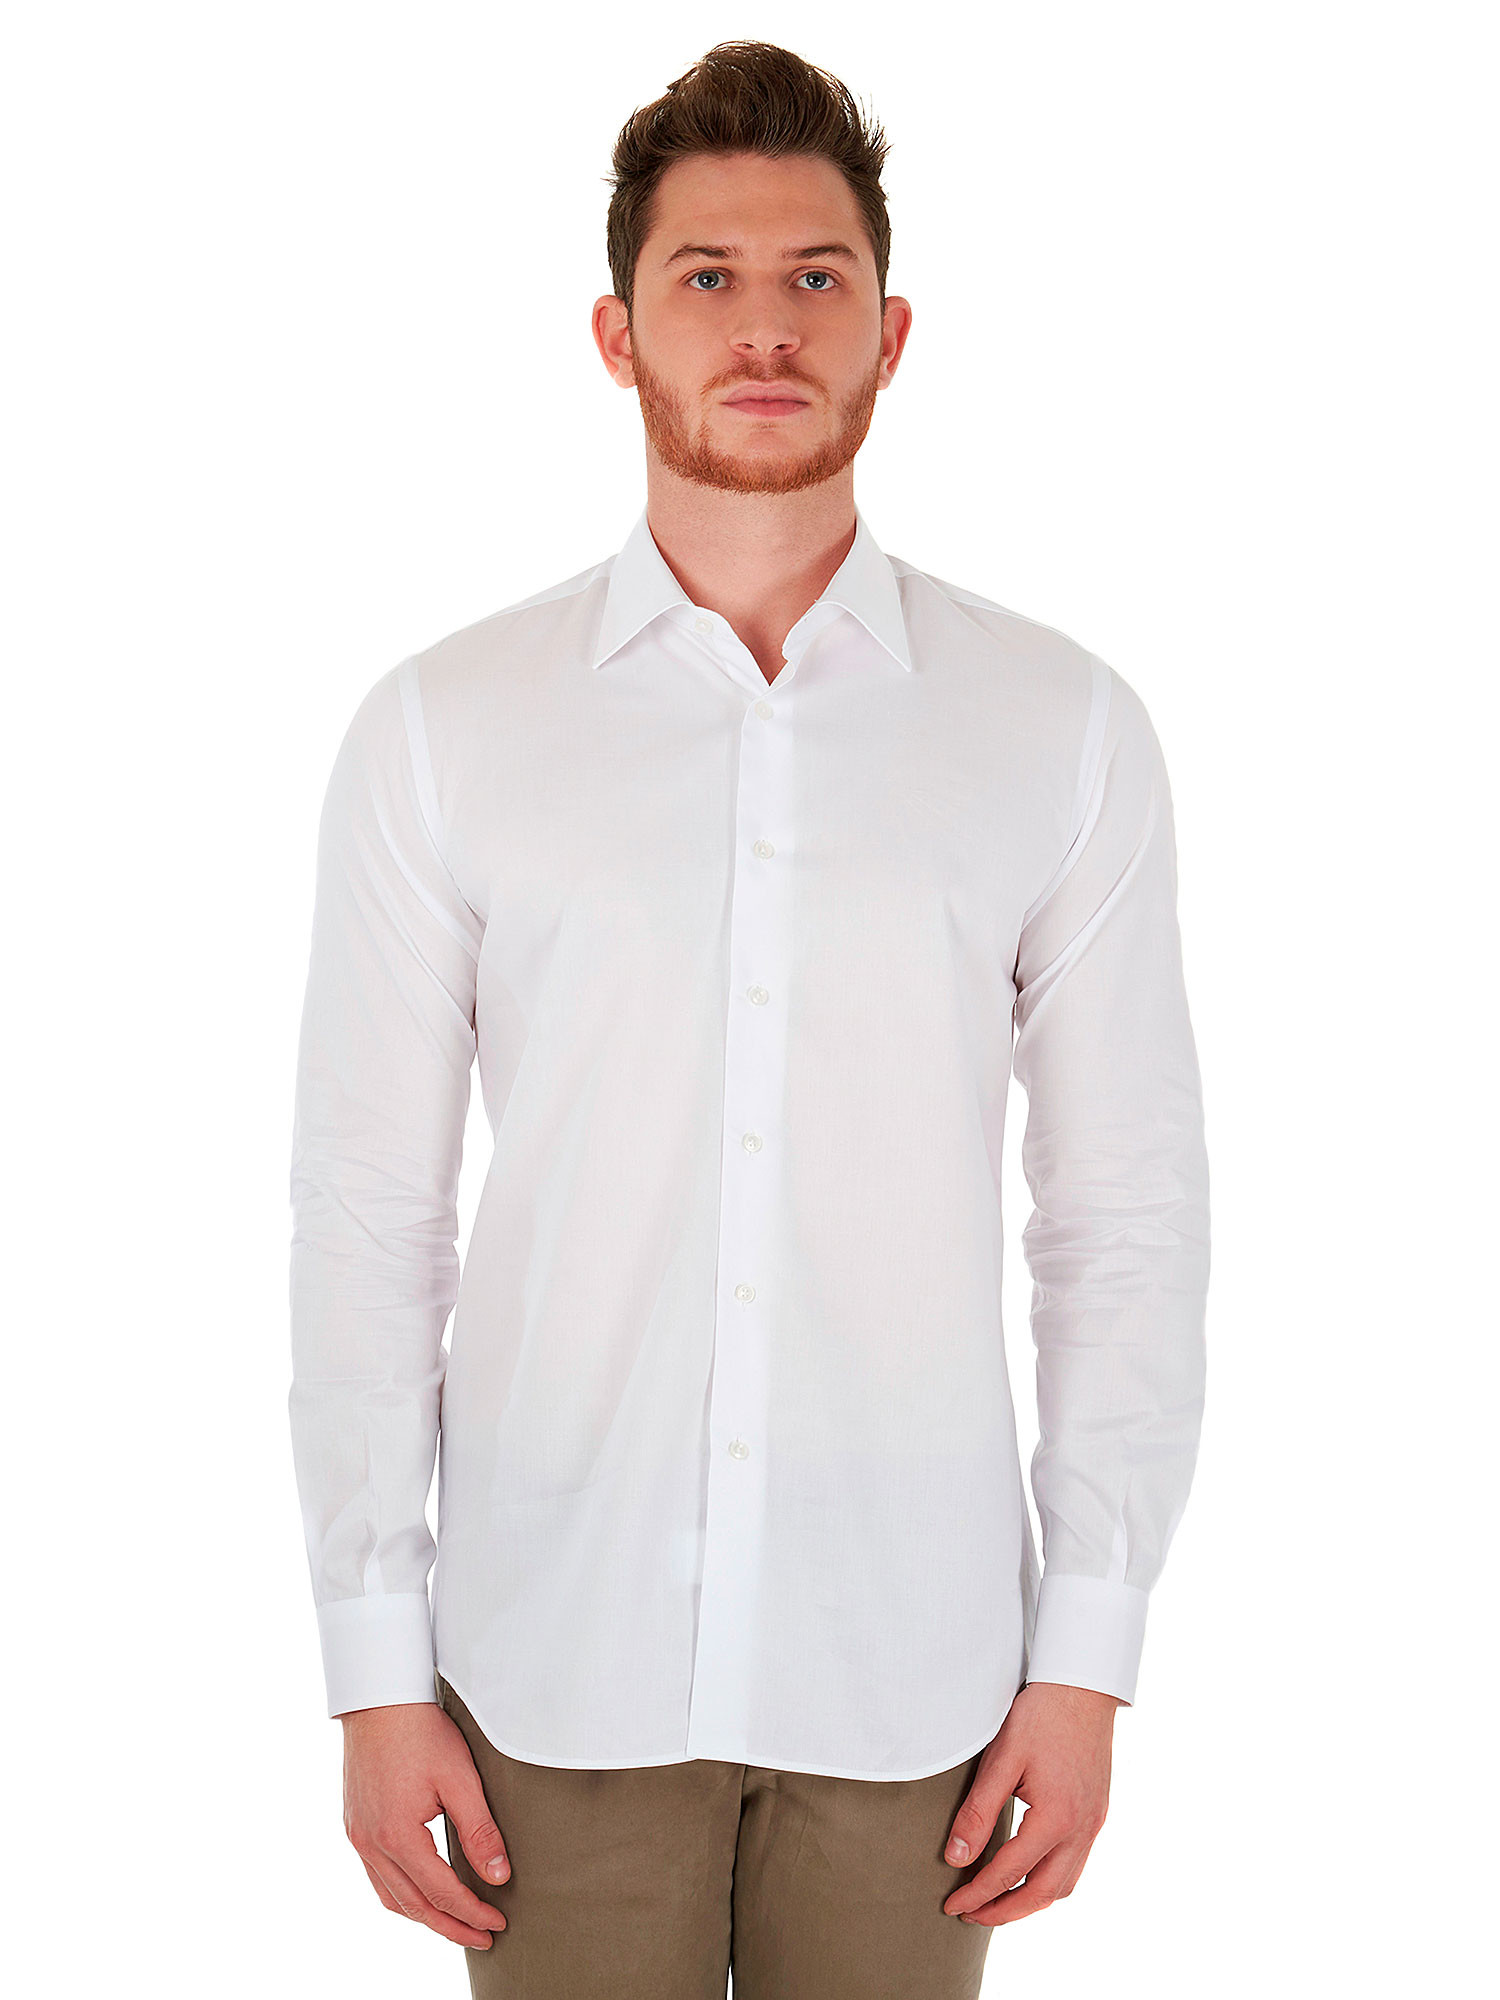 Marcus white men's shirt with classic collar